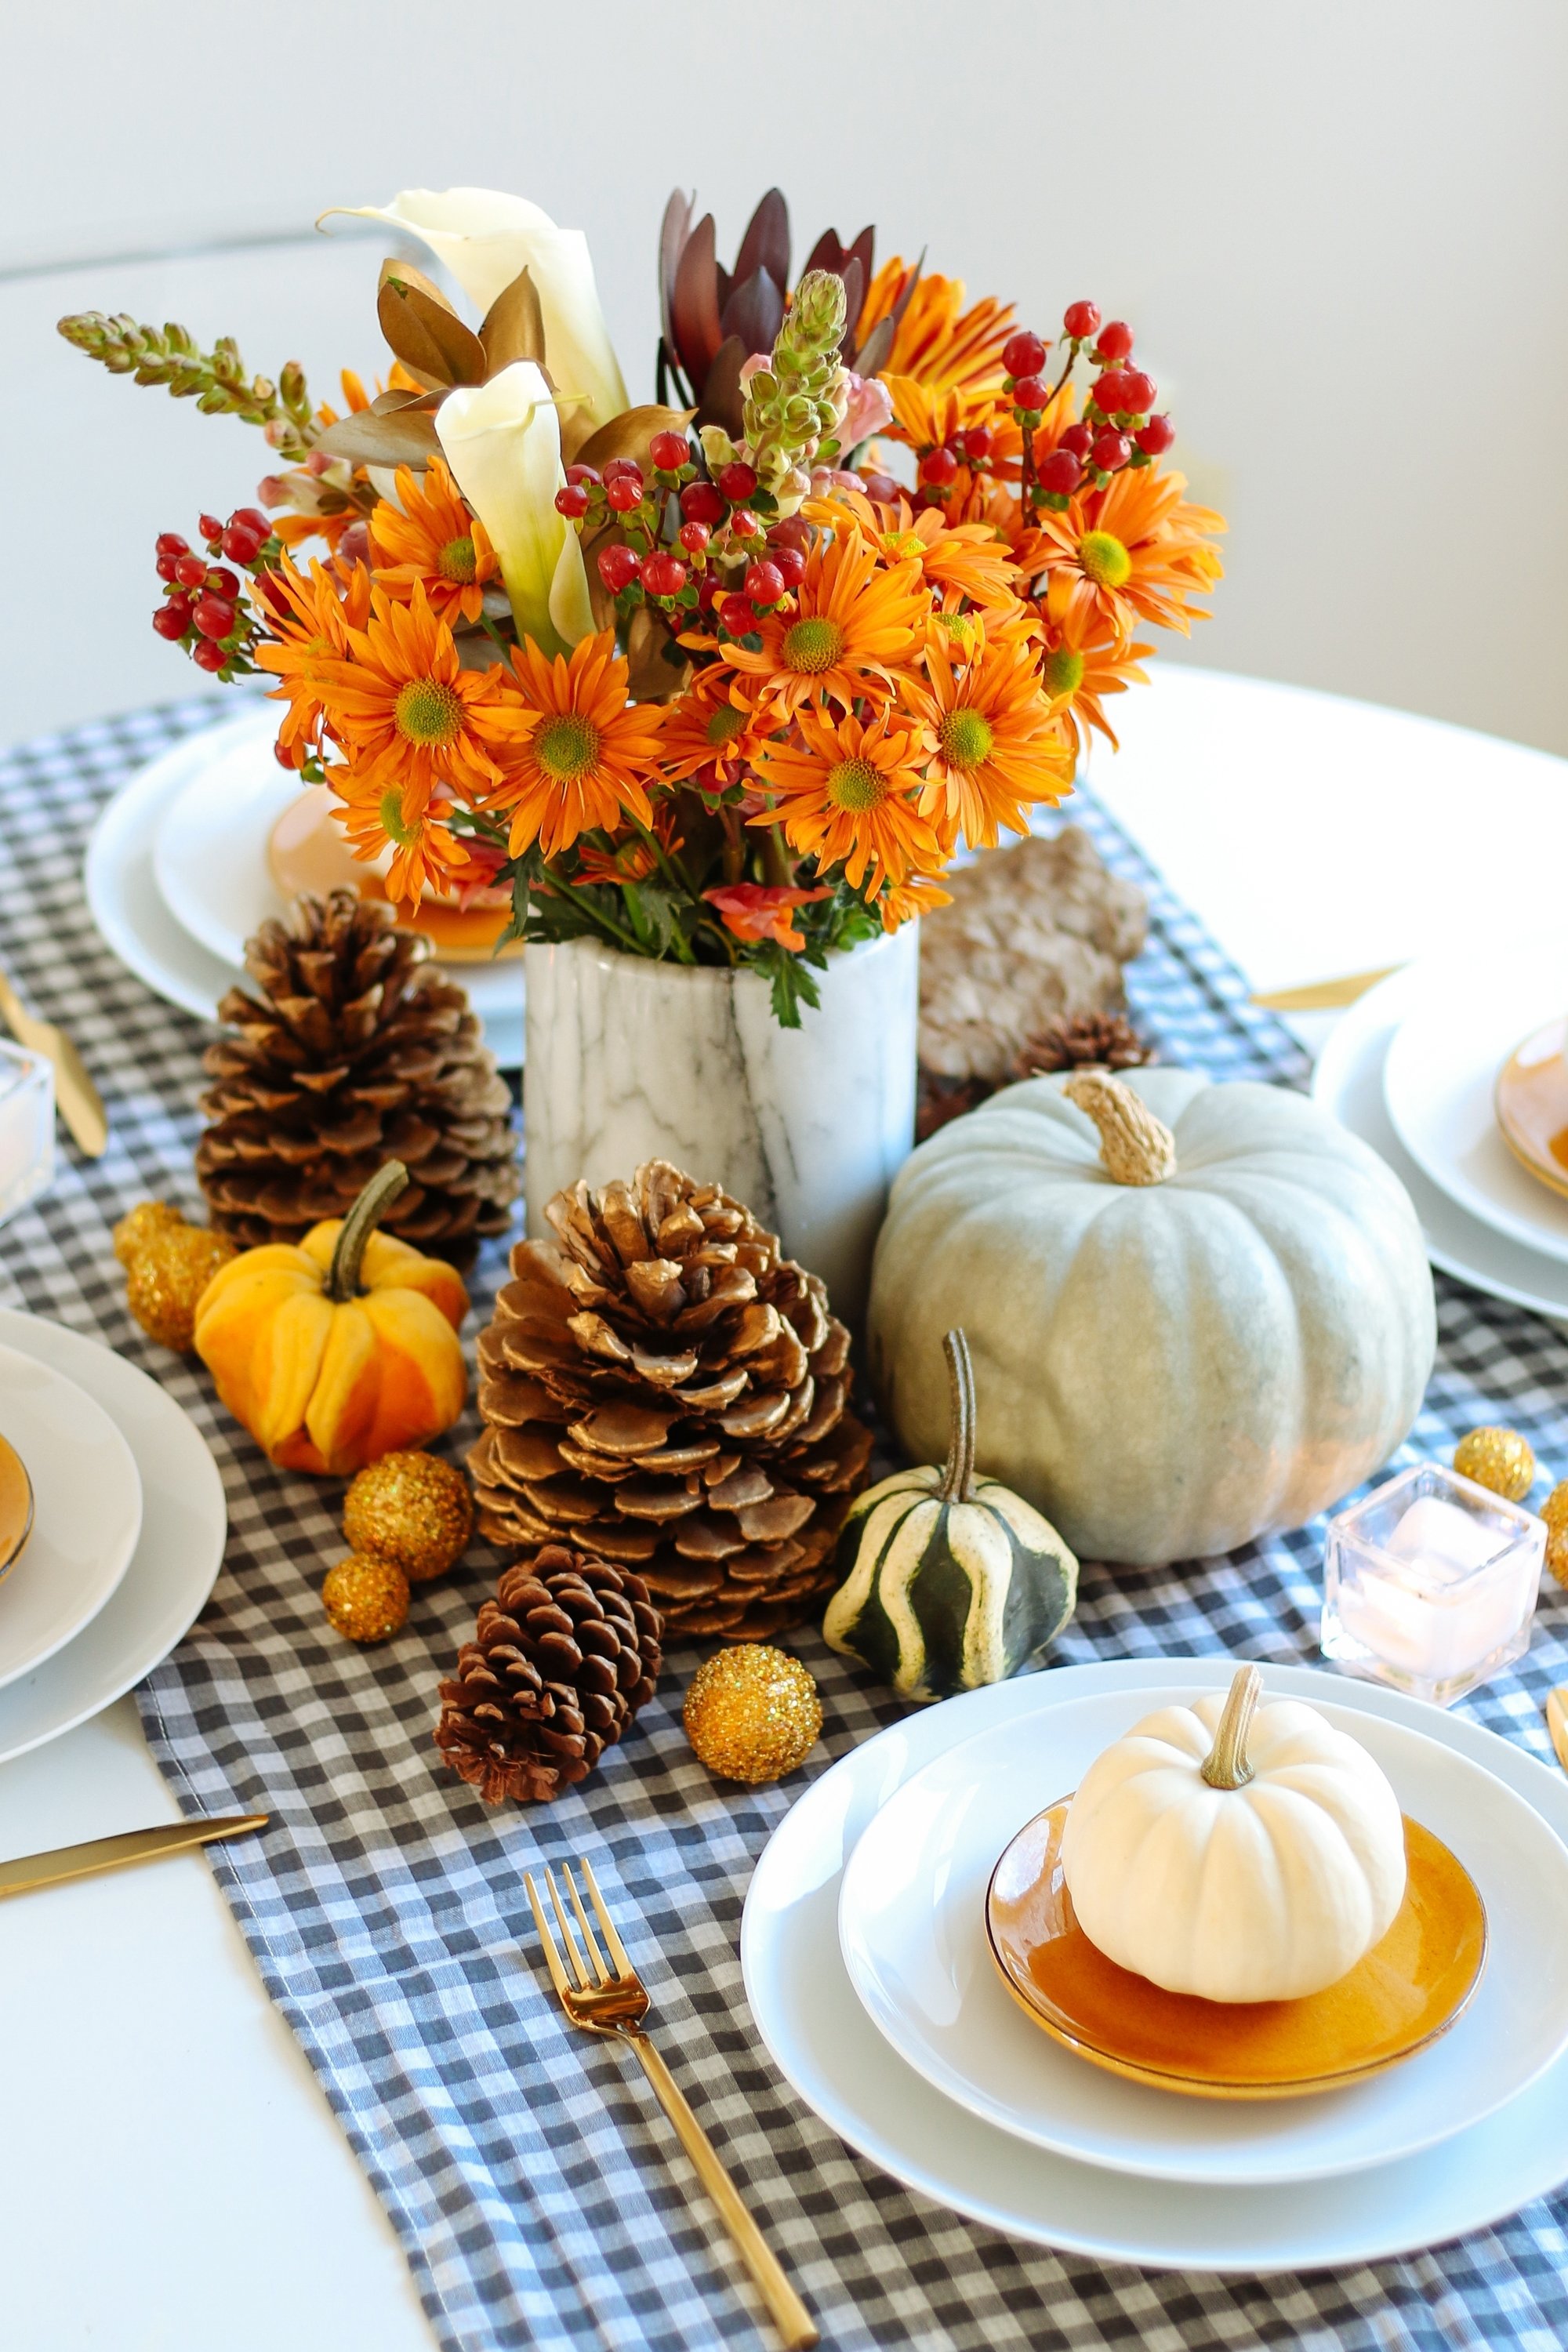 10 Spectacular Decorating Ideas For Thanksgiving Table furniture diy thanksgiving centerpieces table decor homemade 2022